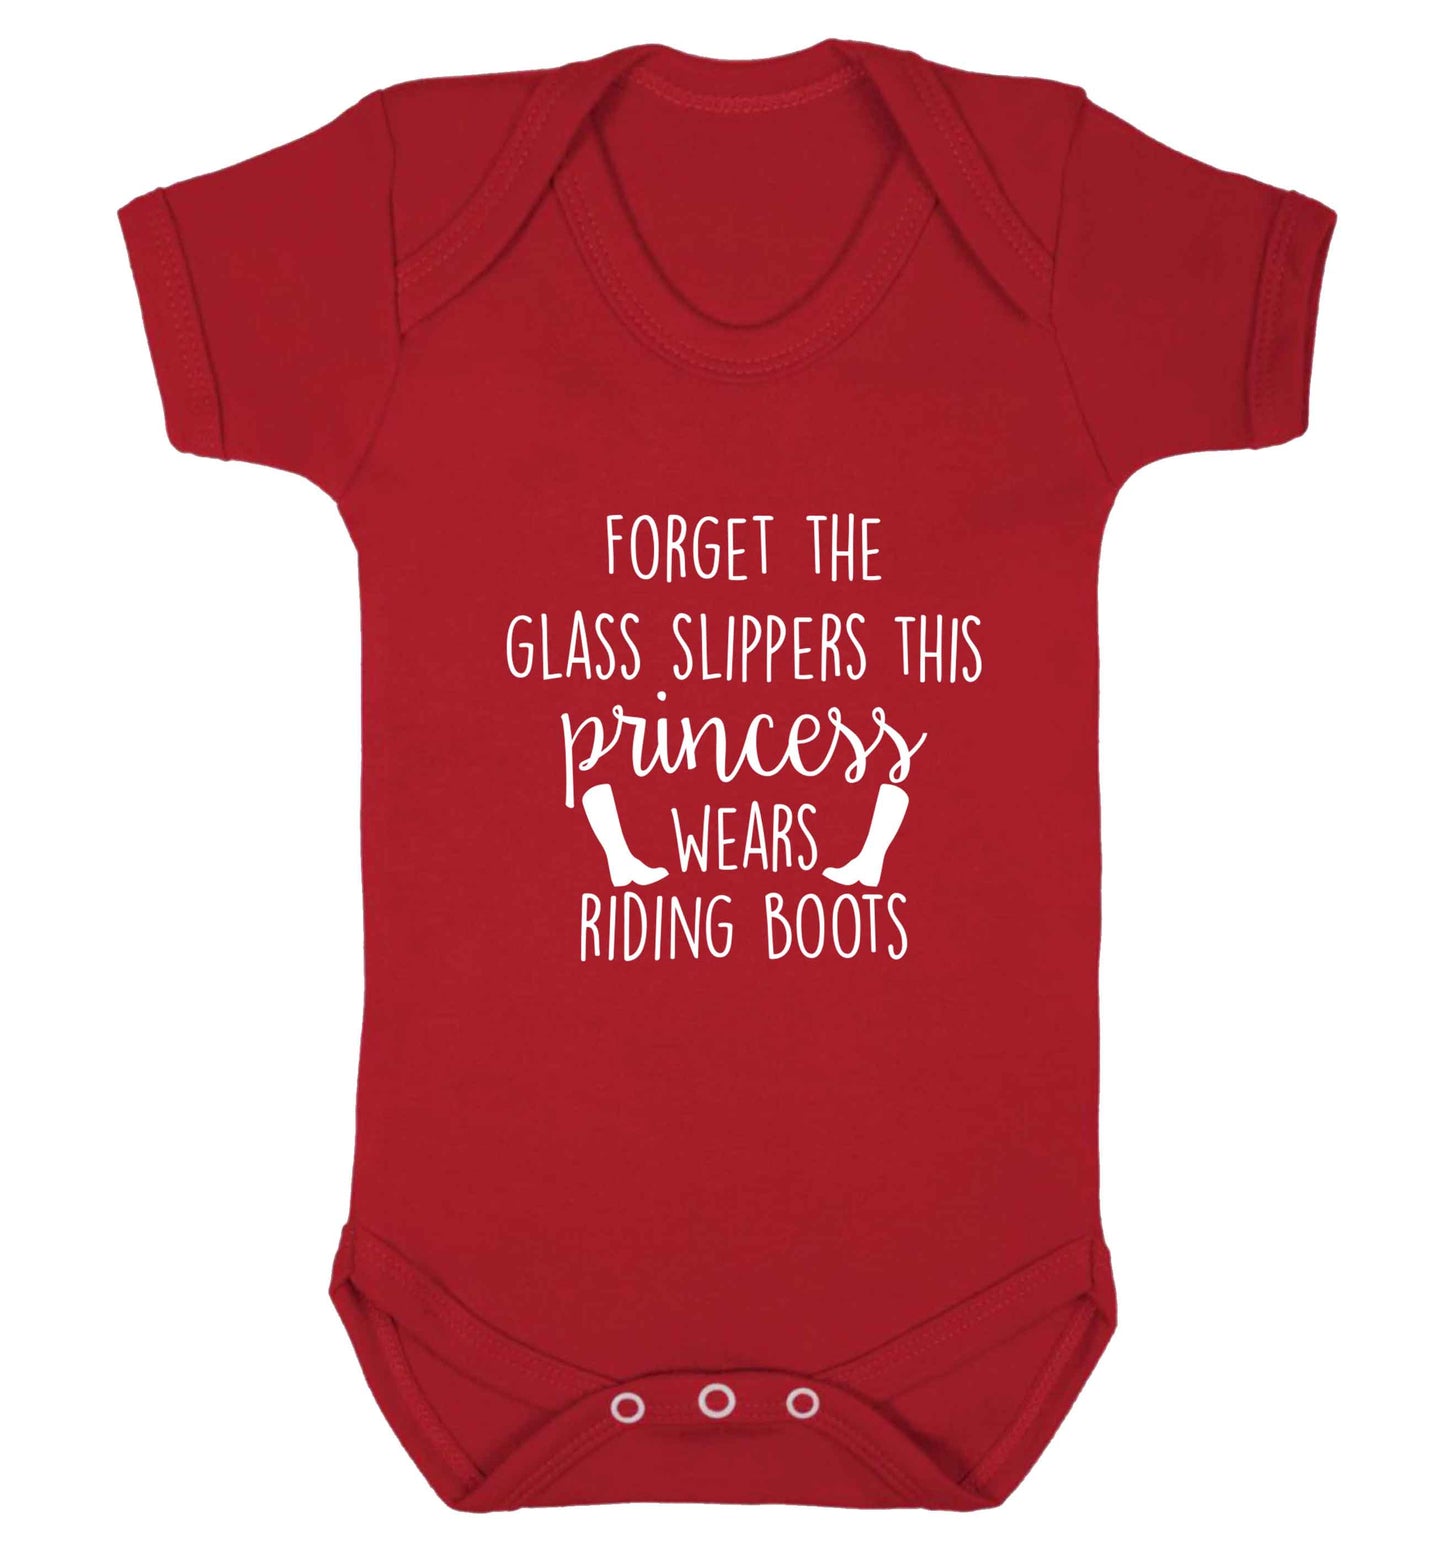 Forget the glass slippers this princess wears riding boots baby vest red 18-24 months